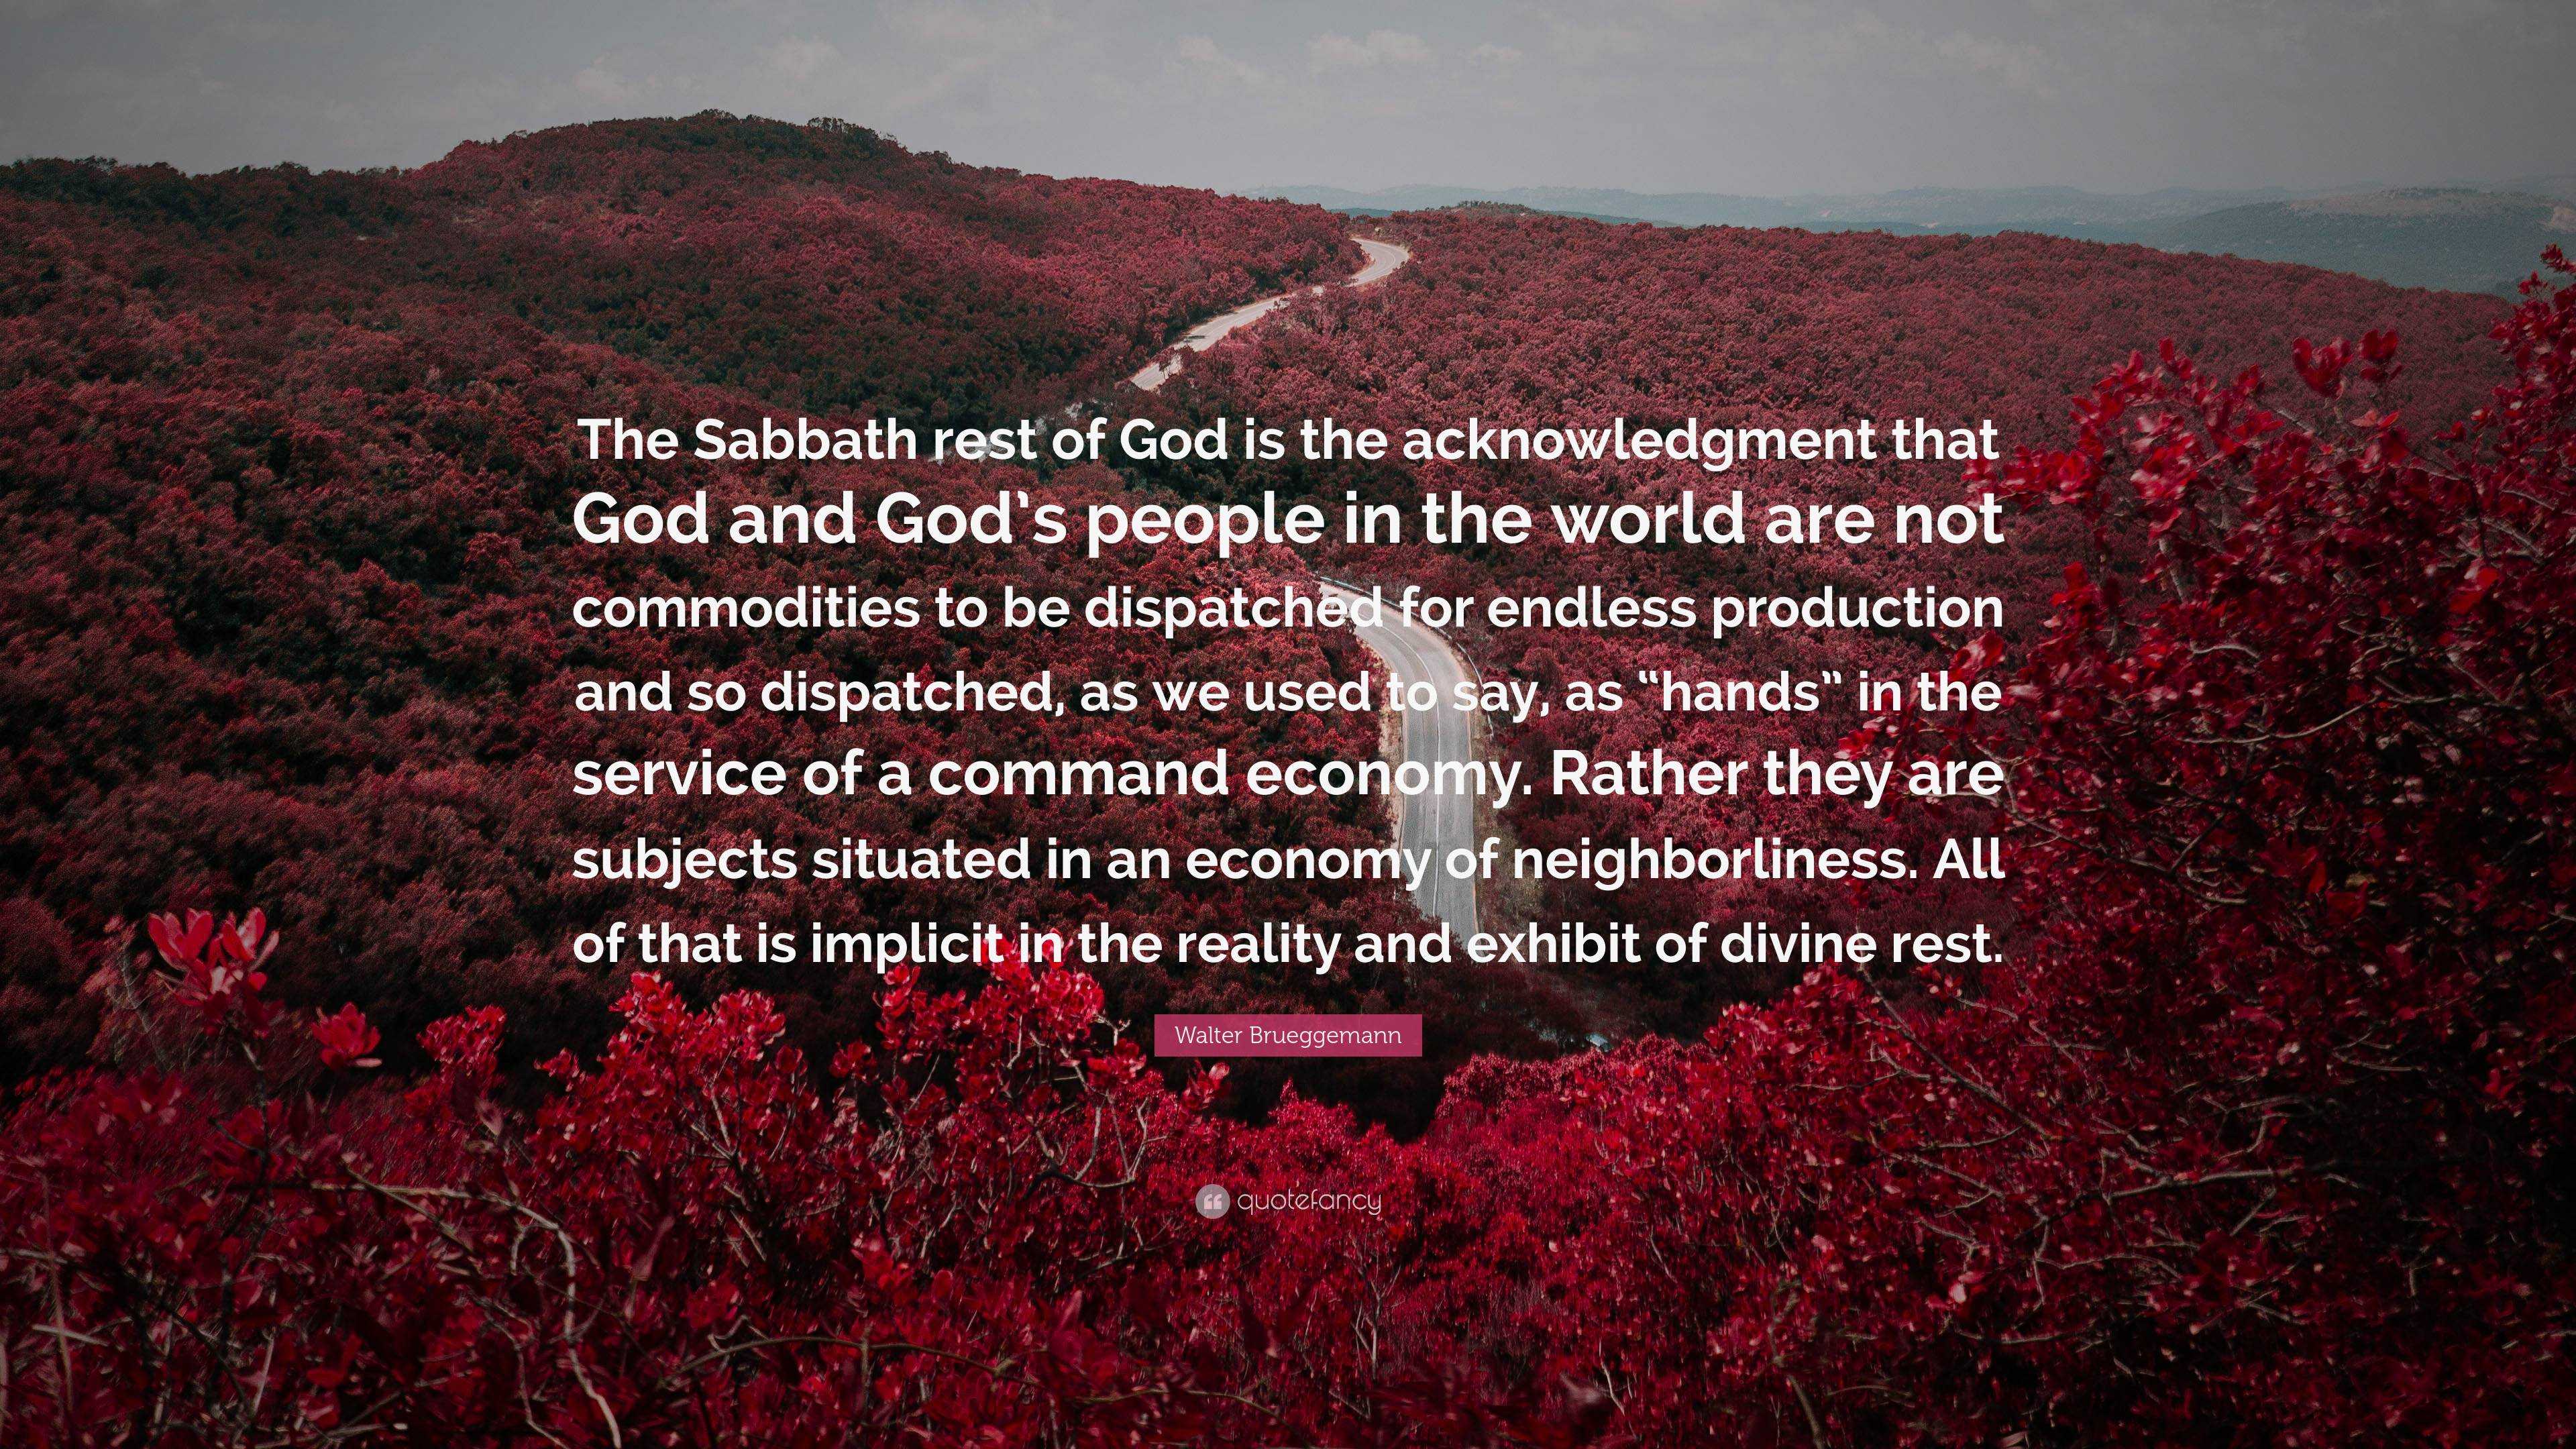 Walter Brueggemann Quote The Sabbath Rest Of God Is The Acknowledgment That God And God S People In The World Are Not Commodities To Be Dispatche